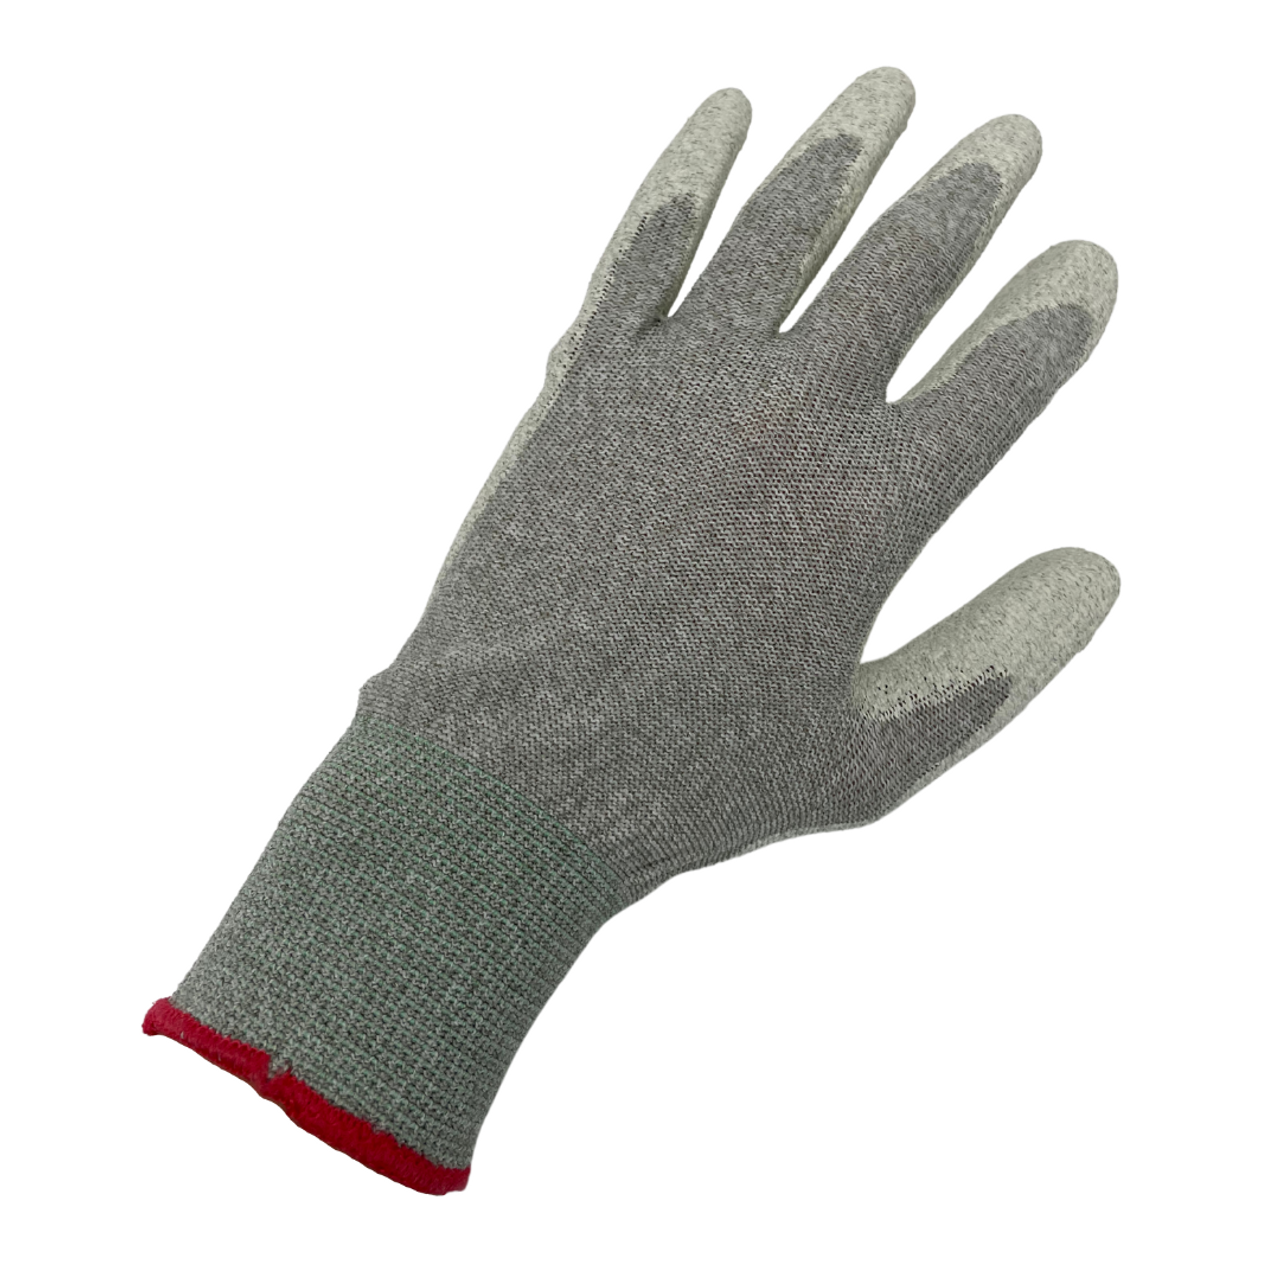 PIP Kut-Gard PolyKor Seamless Knit Gloves, Quantity: Case of 24